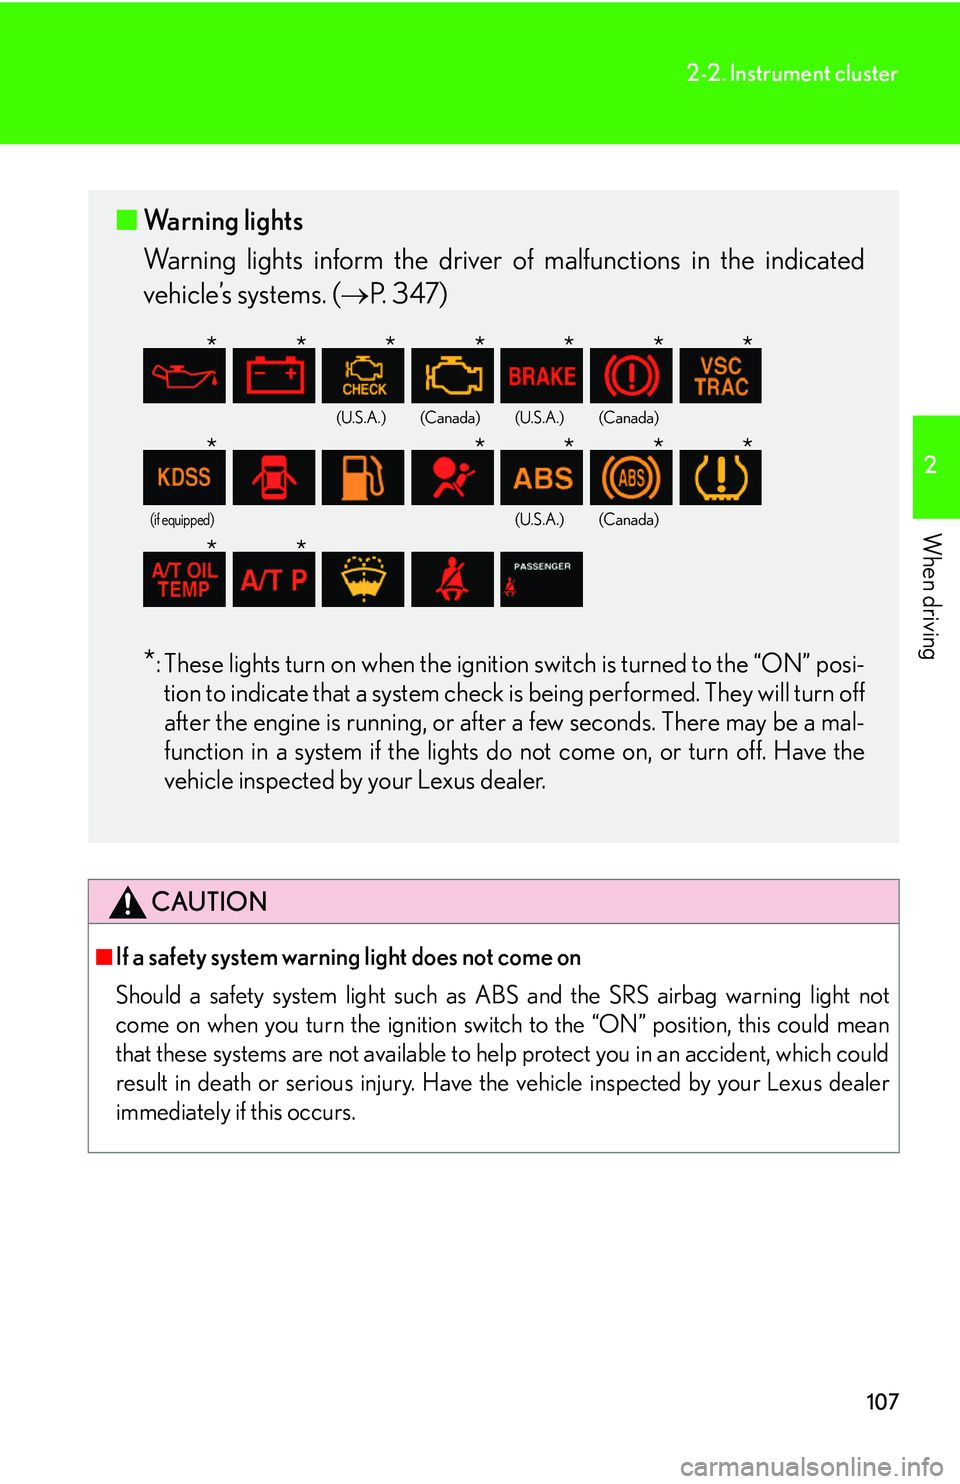 Lexus GX470 2007  Theft deterrent system / LEXUS 2007 GX470 OWNERS MANUAL (OM60C64U) 107
2-2. Instrument cluster
2
When driving
CAUTION
■If a safety system warning light does not come on 
Should a safety system light such as ABS and the SRS airbag warning light not
come on when you 